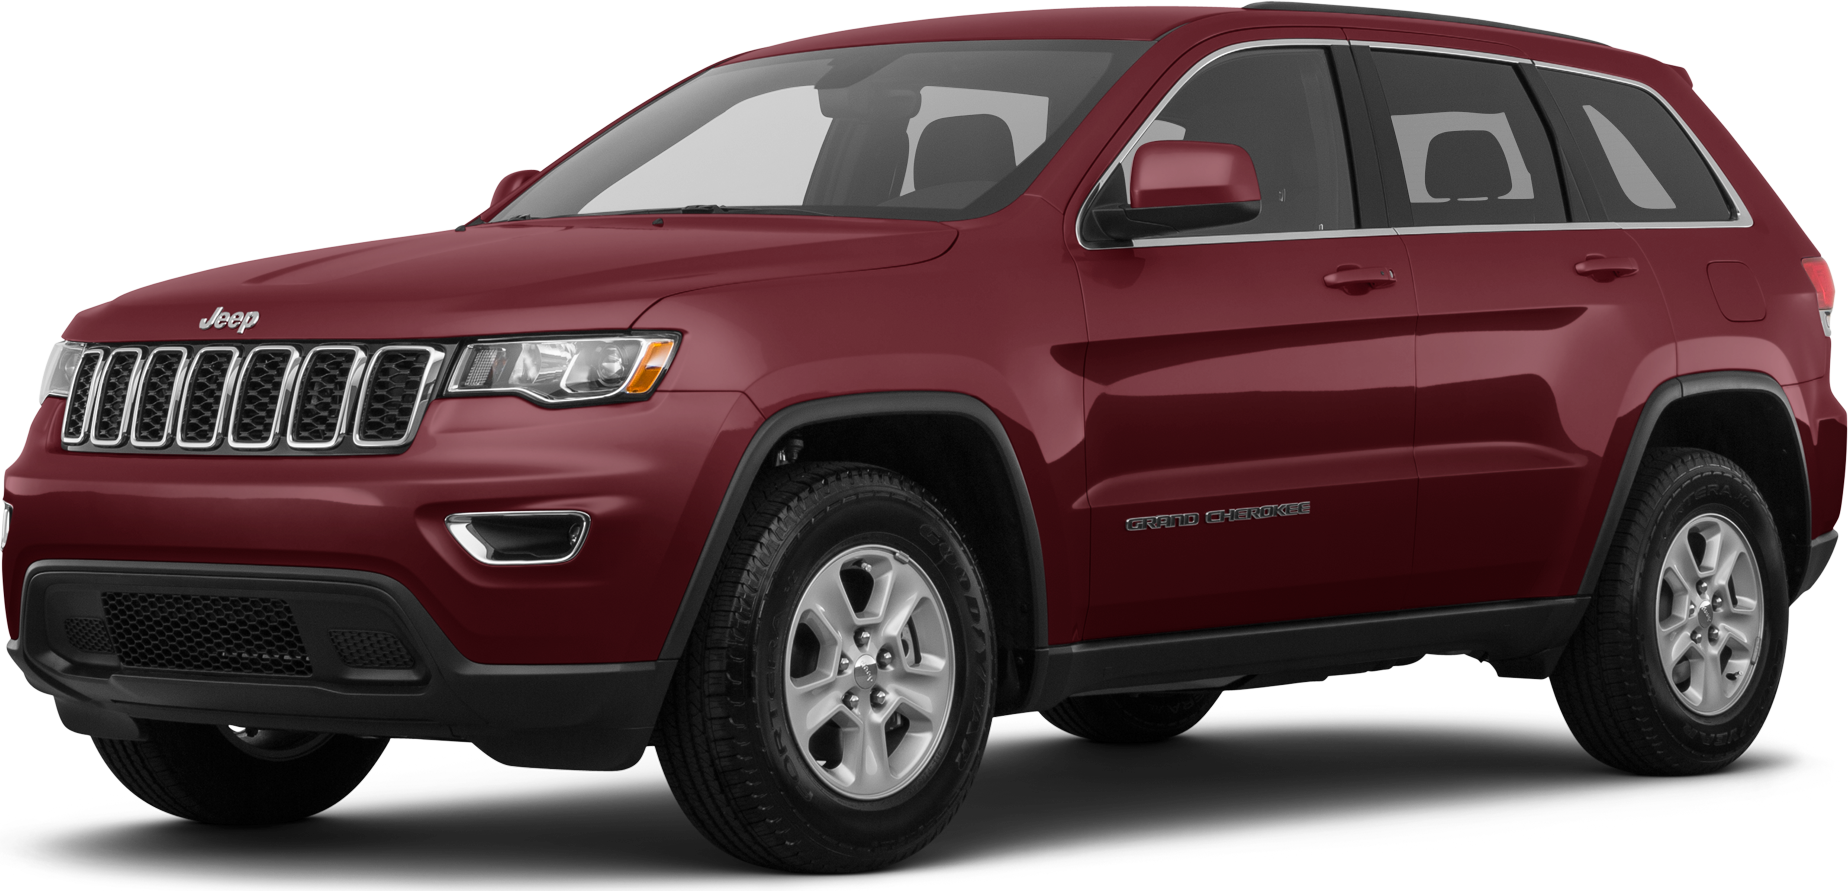 2018 Jeep Grand Cherokee Price, Value, Ratings & Reviews